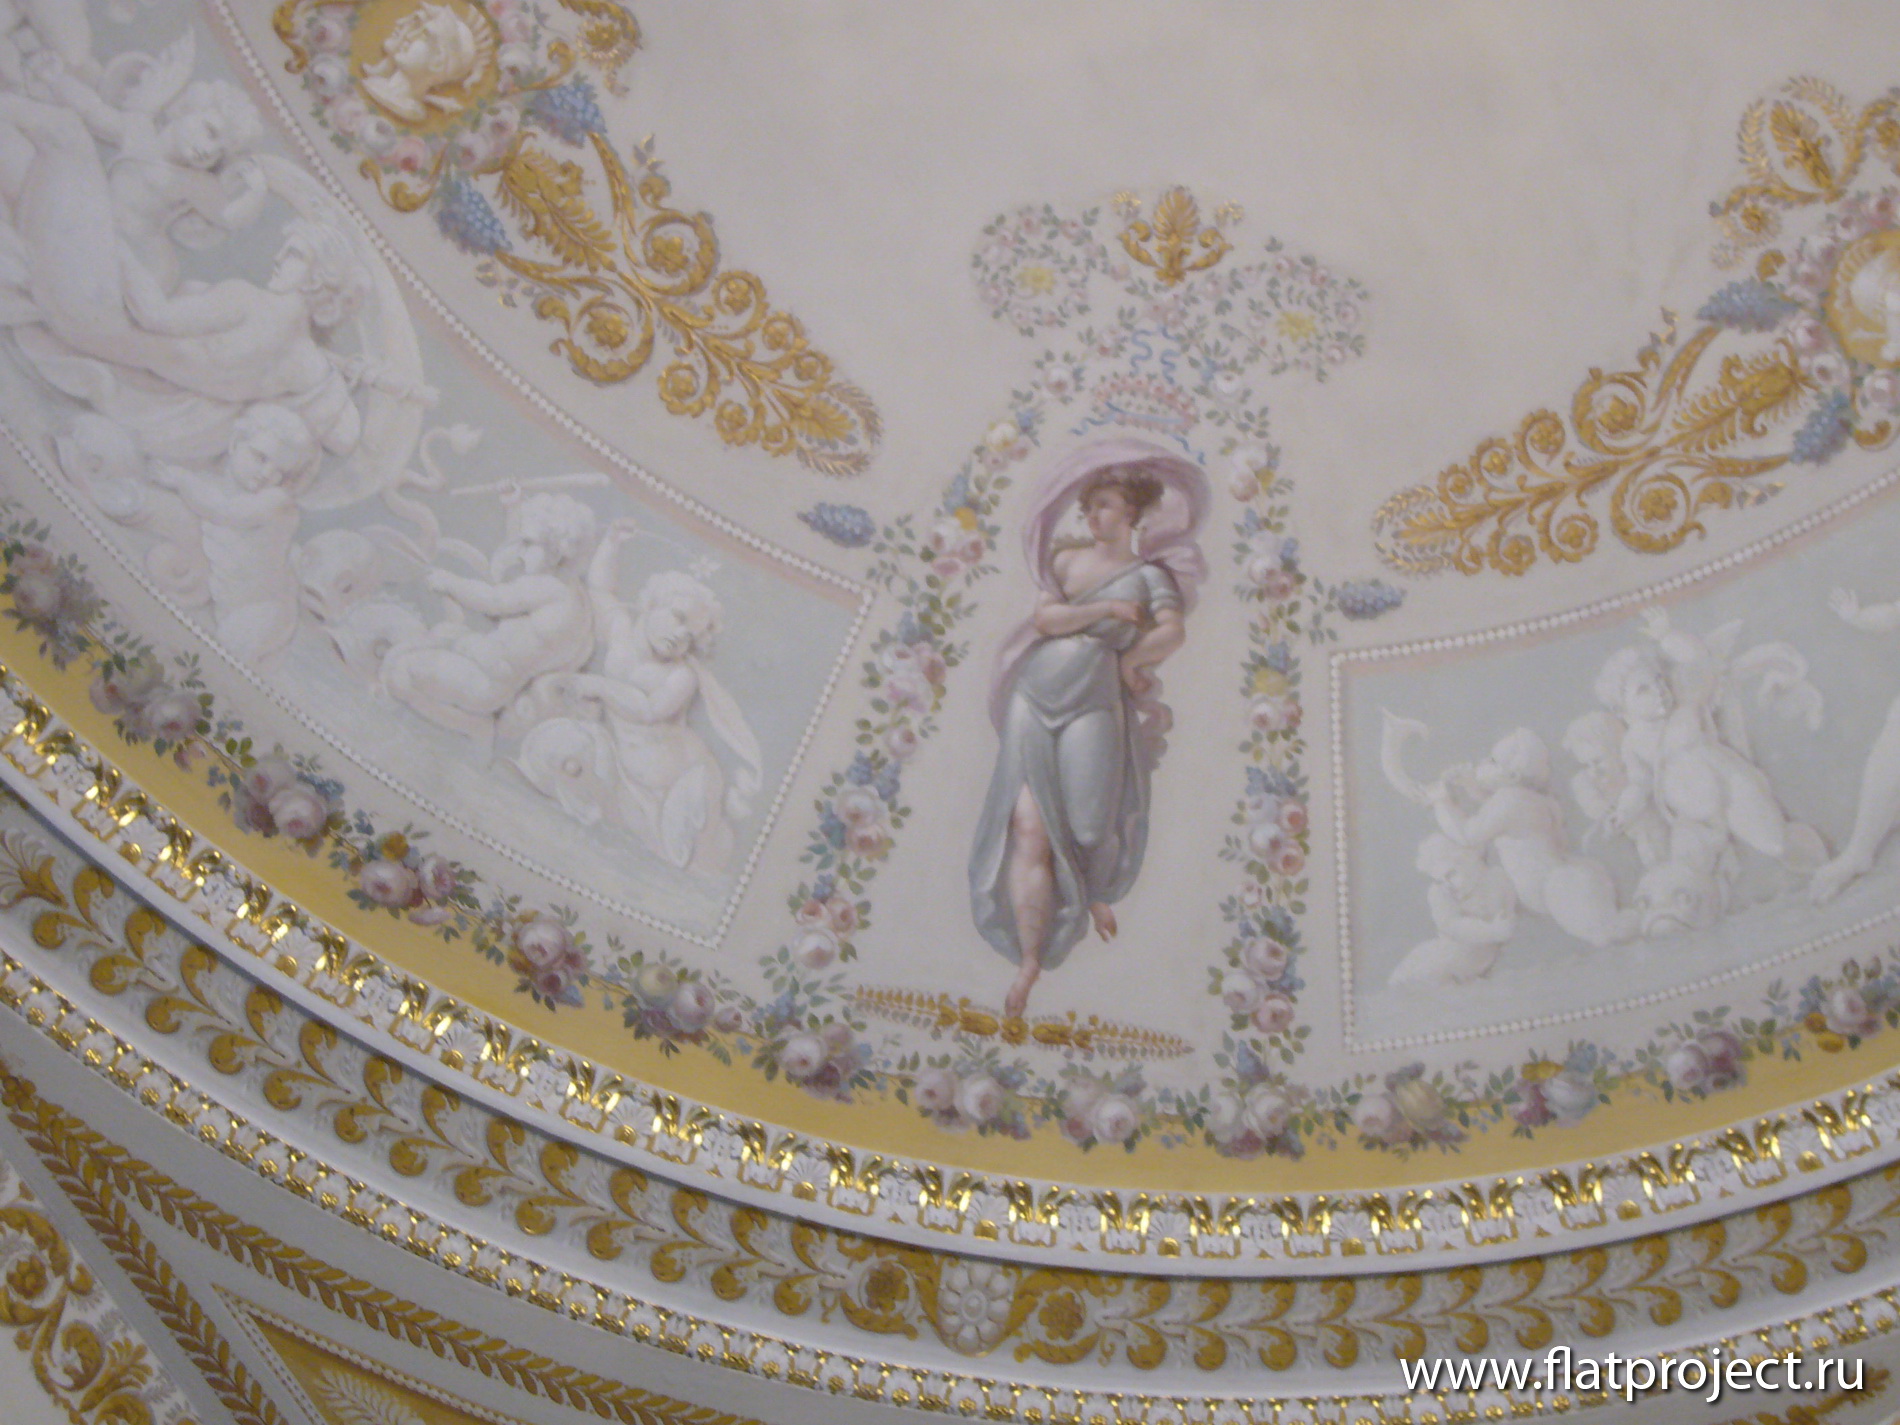 The State Russian museum interiors – photo 57